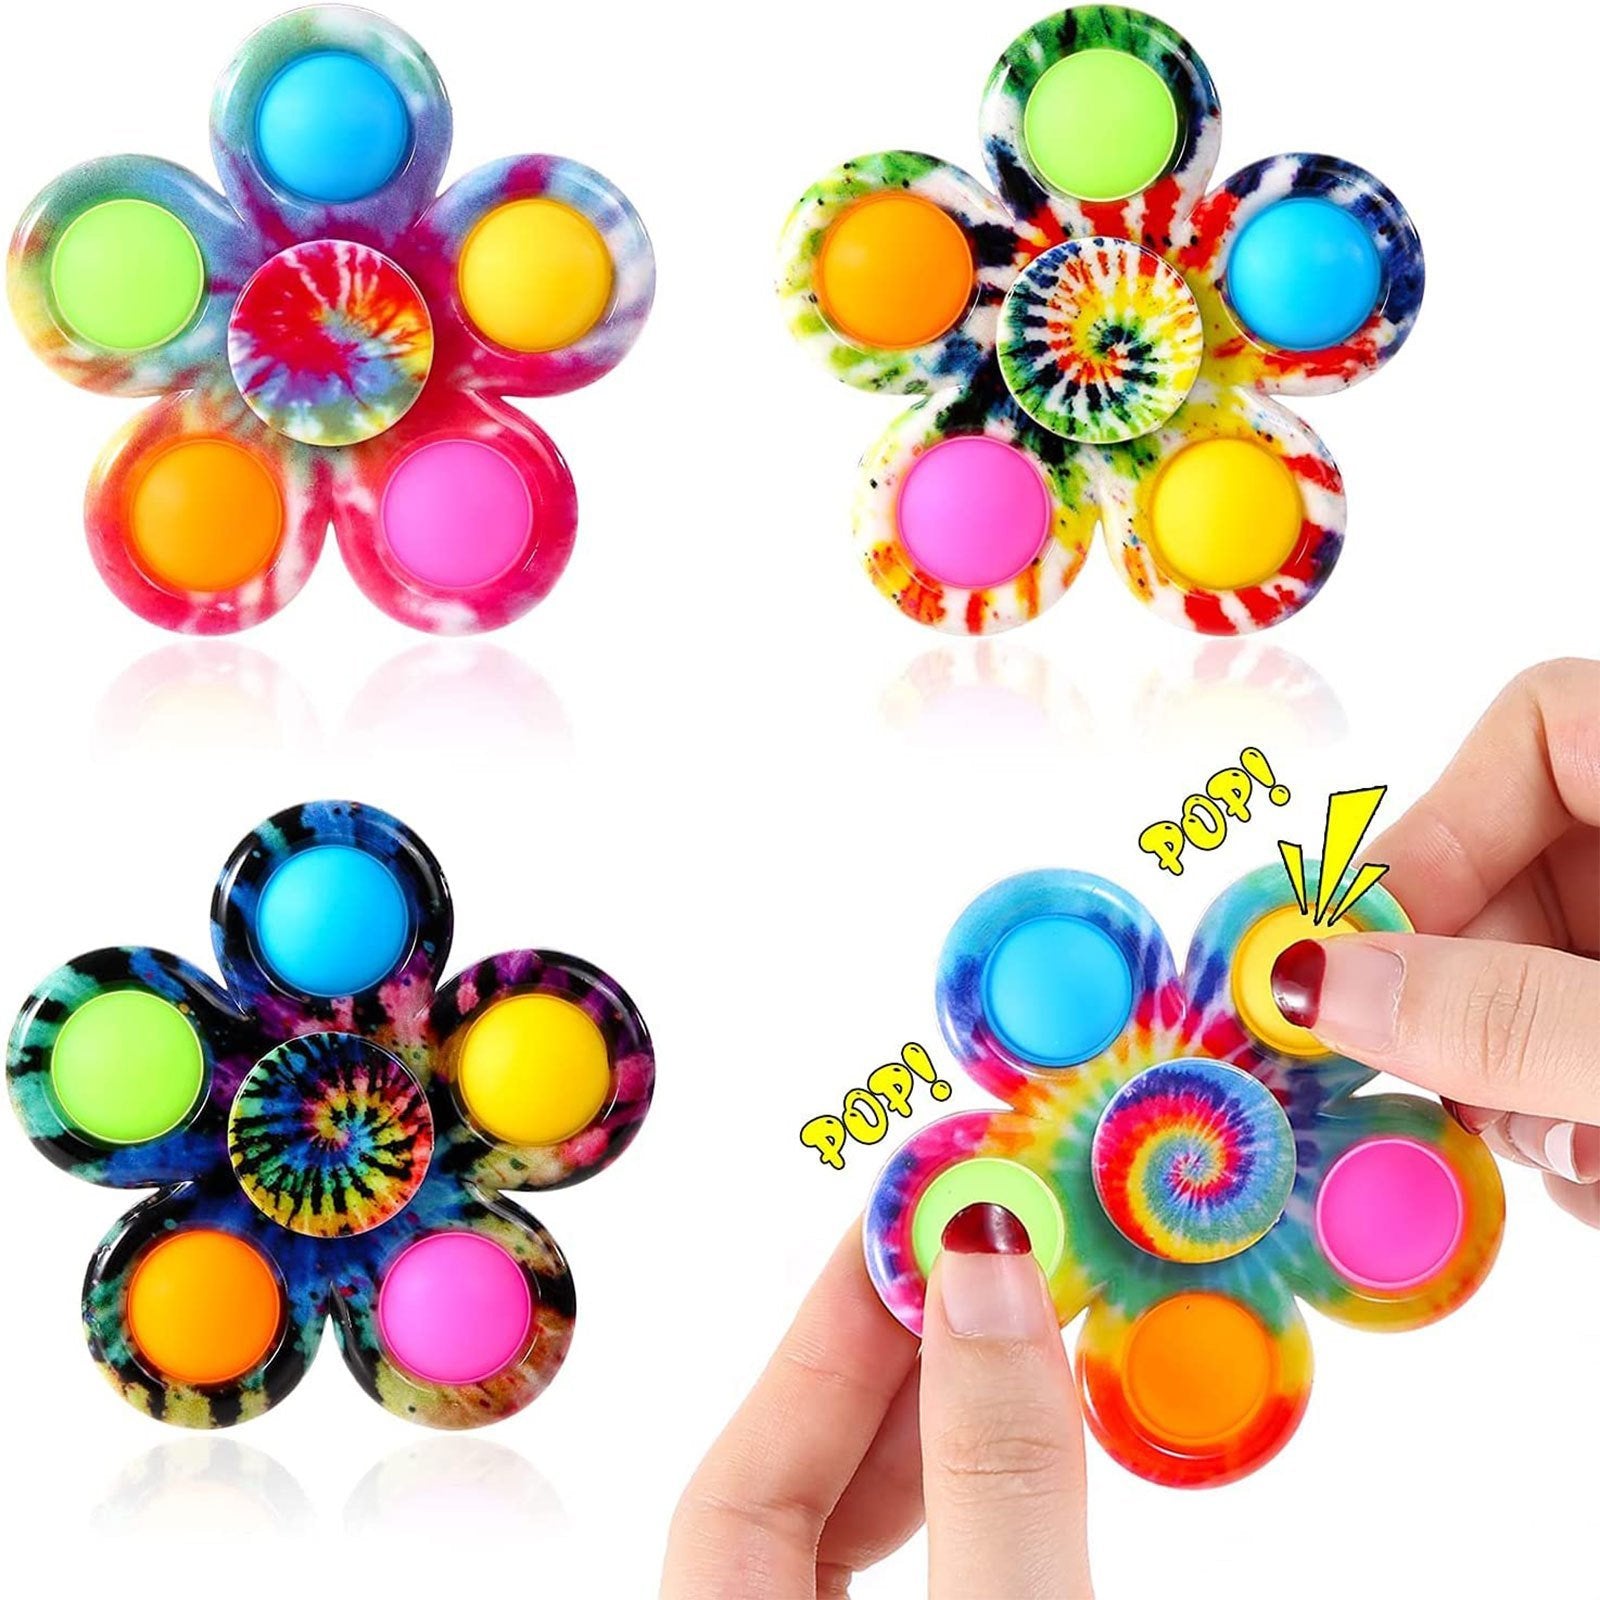 Set of vibrant Floral Bubble Push Pop Fidget Spinning Toys in multiple designs, with a hand pressing one bubble on a spinner.